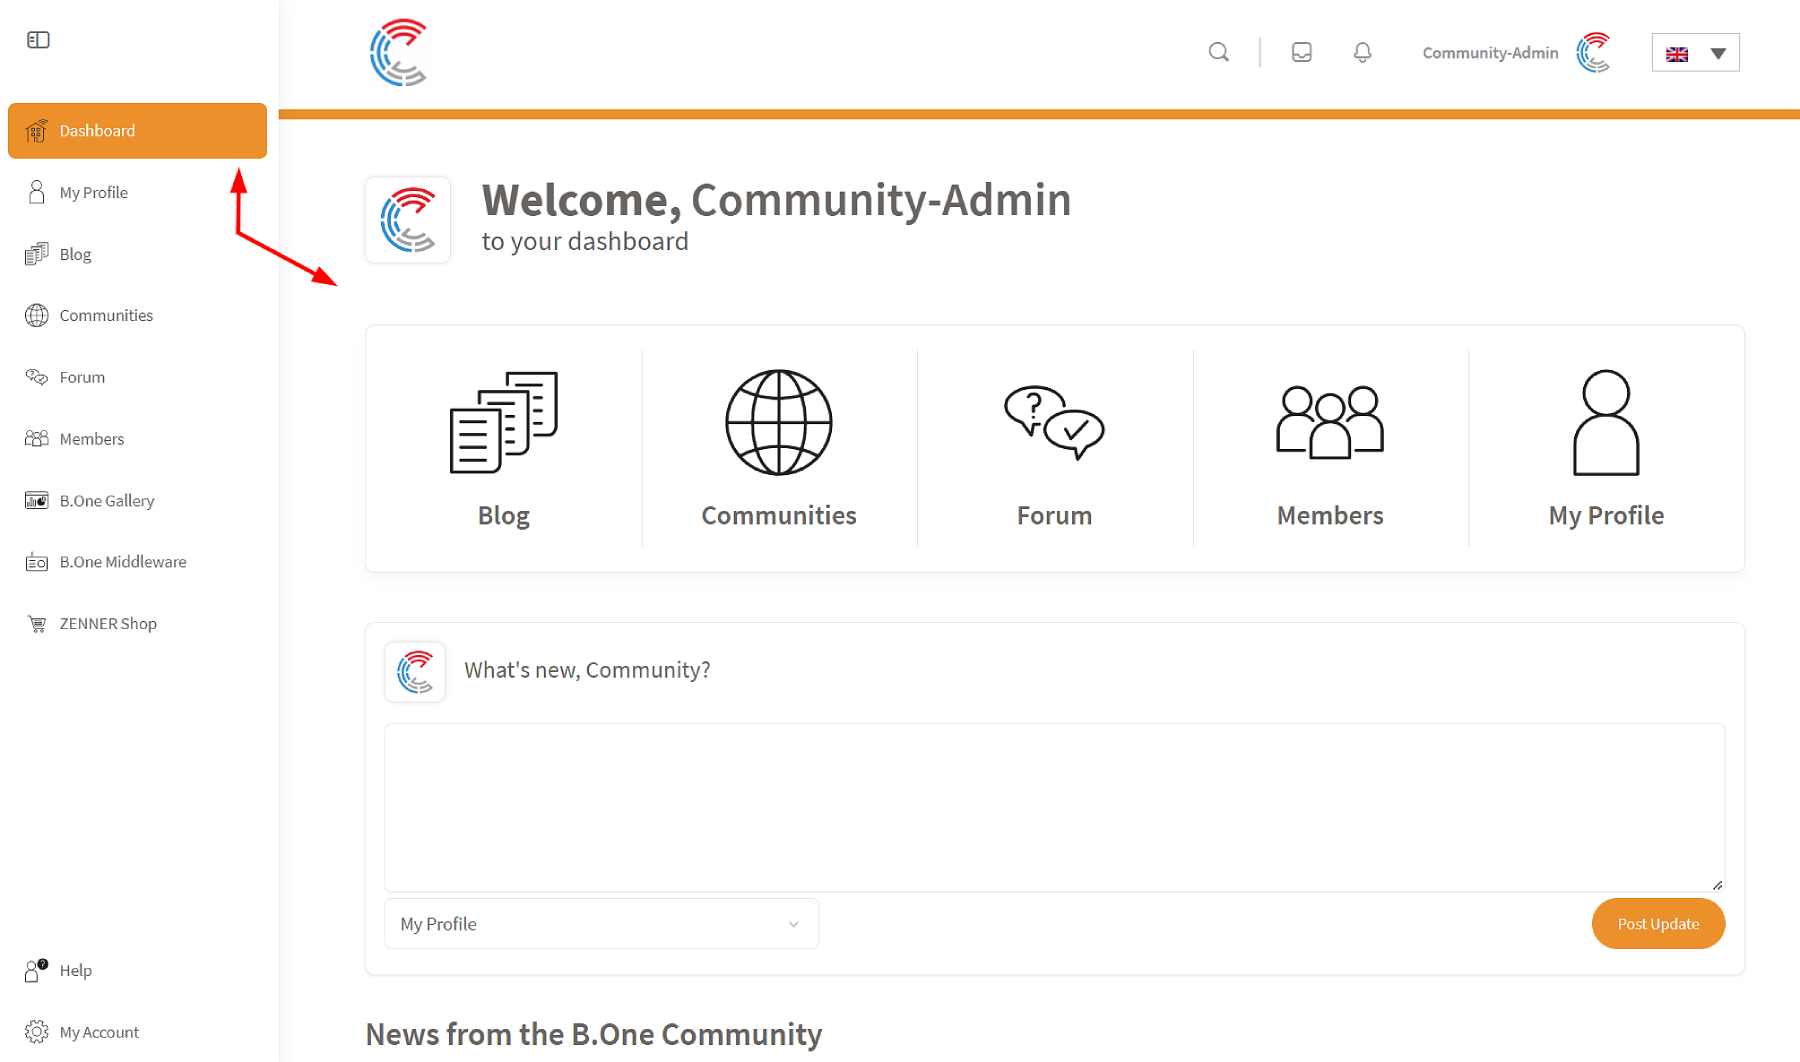 B.One Community: Personal dashboard when logged in